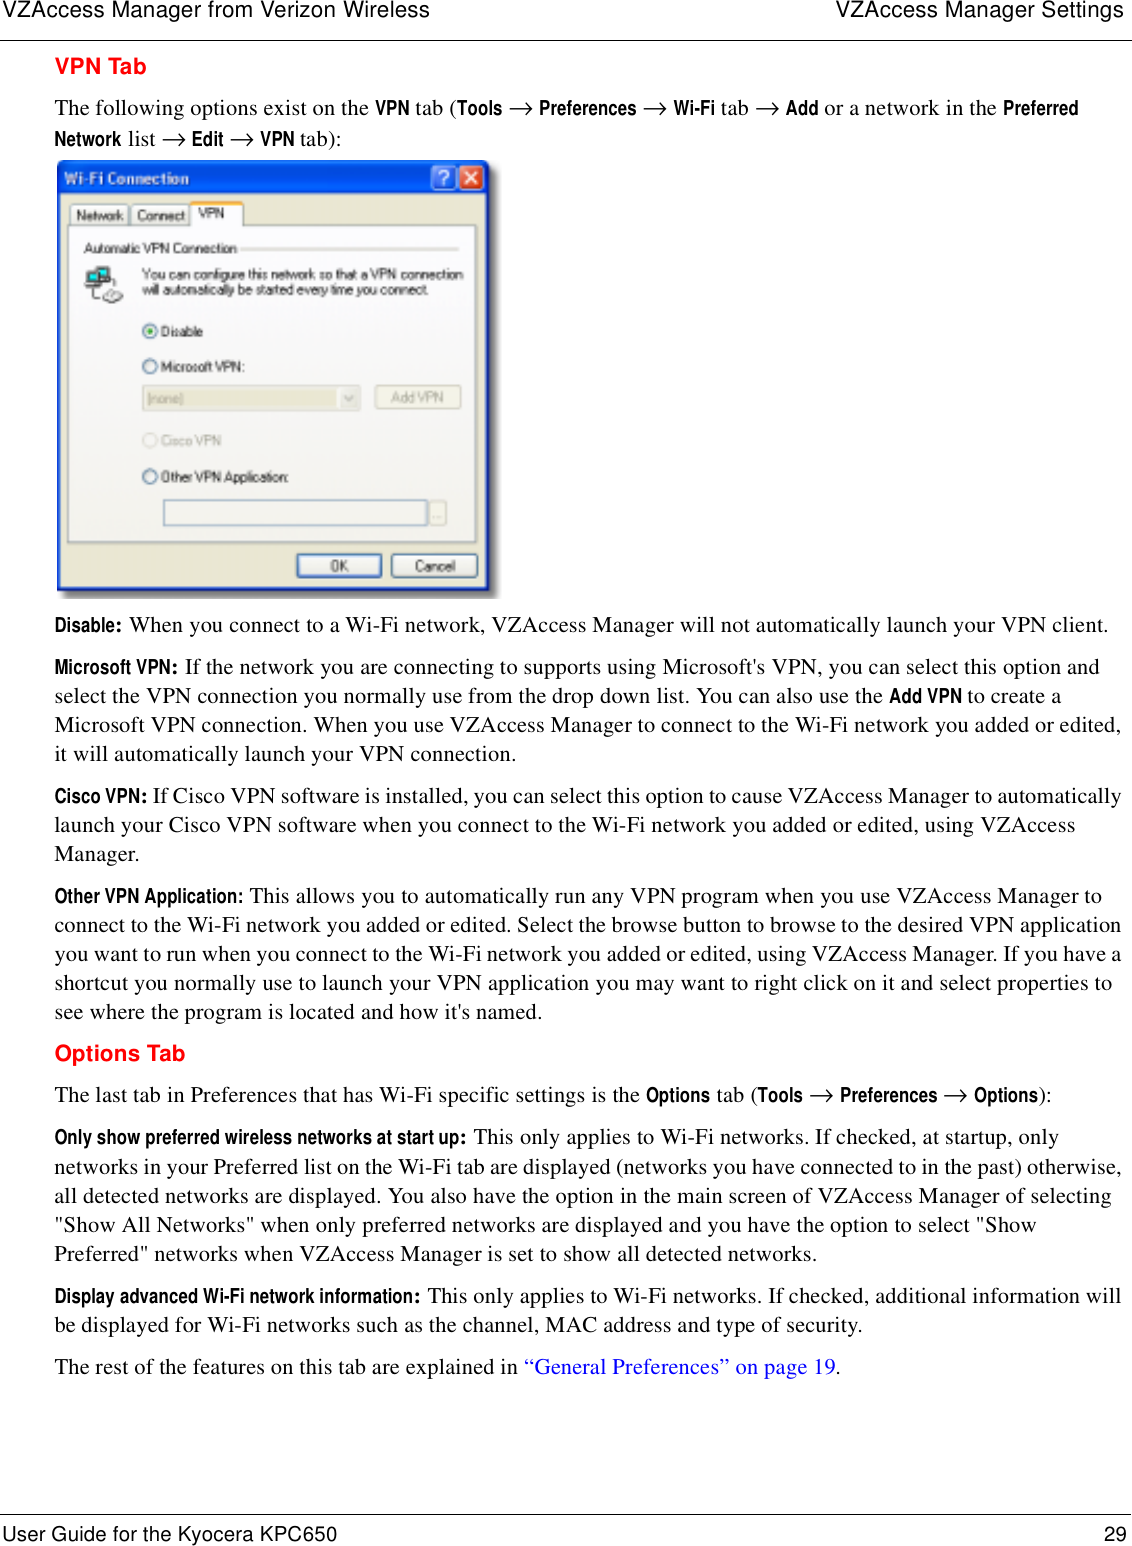 VZAccess Manager from Verizon Wireless VZAccess Manager SettingsUser Guide for the Kyocera KPC650 29 VPN TabThe following options exist on the VPN tab (Tools → Preferences → Wi-Fi tab → Add or a network in the Preferred Network list → Edit → VPN tab):Disable: When you connect to a Wi-Fi network, VZAccess Manager will not automatically launch your VPN client.Microsoft VPN: If the network you are connecting to supports using Microsoft&apos;s VPN, you can select this option and select the VPN connection you normally use from the drop down list. You can also use the Add VPN to create a Microsoft VPN connection. When you use VZAccess Manager to connect to the Wi-Fi network you added or edited, it will automatically launch your VPN connection.Cisco VPN: If Cisco VPN software is installed, you can select this option to cause VZAccess Manager to automatically launch your Cisco VPN software when you connect to the Wi-Fi network you added or edited, using VZAccess Manager.Other VPN Application: This allows you to automatically run any VPN program when you use VZAccess Manager to connect to the Wi-Fi network you added or edited. Select the browse button to browse to the desired VPN application you want to run when you connect to the Wi-Fi network you added or edited, using VZAccess Manager. If you have a shortcut you normally use to launch your VPN application you may want to right click on it and select properties to see where the program is located and how it&apos;s named.Options TabThe last tab in Preferences that has Wi-Fi specific settings is the Options tab (Tools → Preferences → Options):Only show preferred wireless networks at start up: This only applies to Wi-Fi networks. If checked, at startup, only networks in your Preferred list on the Wi-Fi tab are displayed (networks you have connected to in the past) otherwise, all detected networks are displayed. You also have the option in the main screen of VZAccess Manager of selecting &quot;Show All Networks&quot; when only preferred networks are displayed and you have the option to select &quot;Show Preferred&quot; networks when VZAccess Manager is set to show all detected networks.Display advanced Wi-Fi network information: This only applies to Wi-Fi networks. If checked, additional information will be displayed for Wi-Fi networks such as the channel, MAC address and type of security. The rest of the features on this tab are explained in “General Preferences” on page 19.